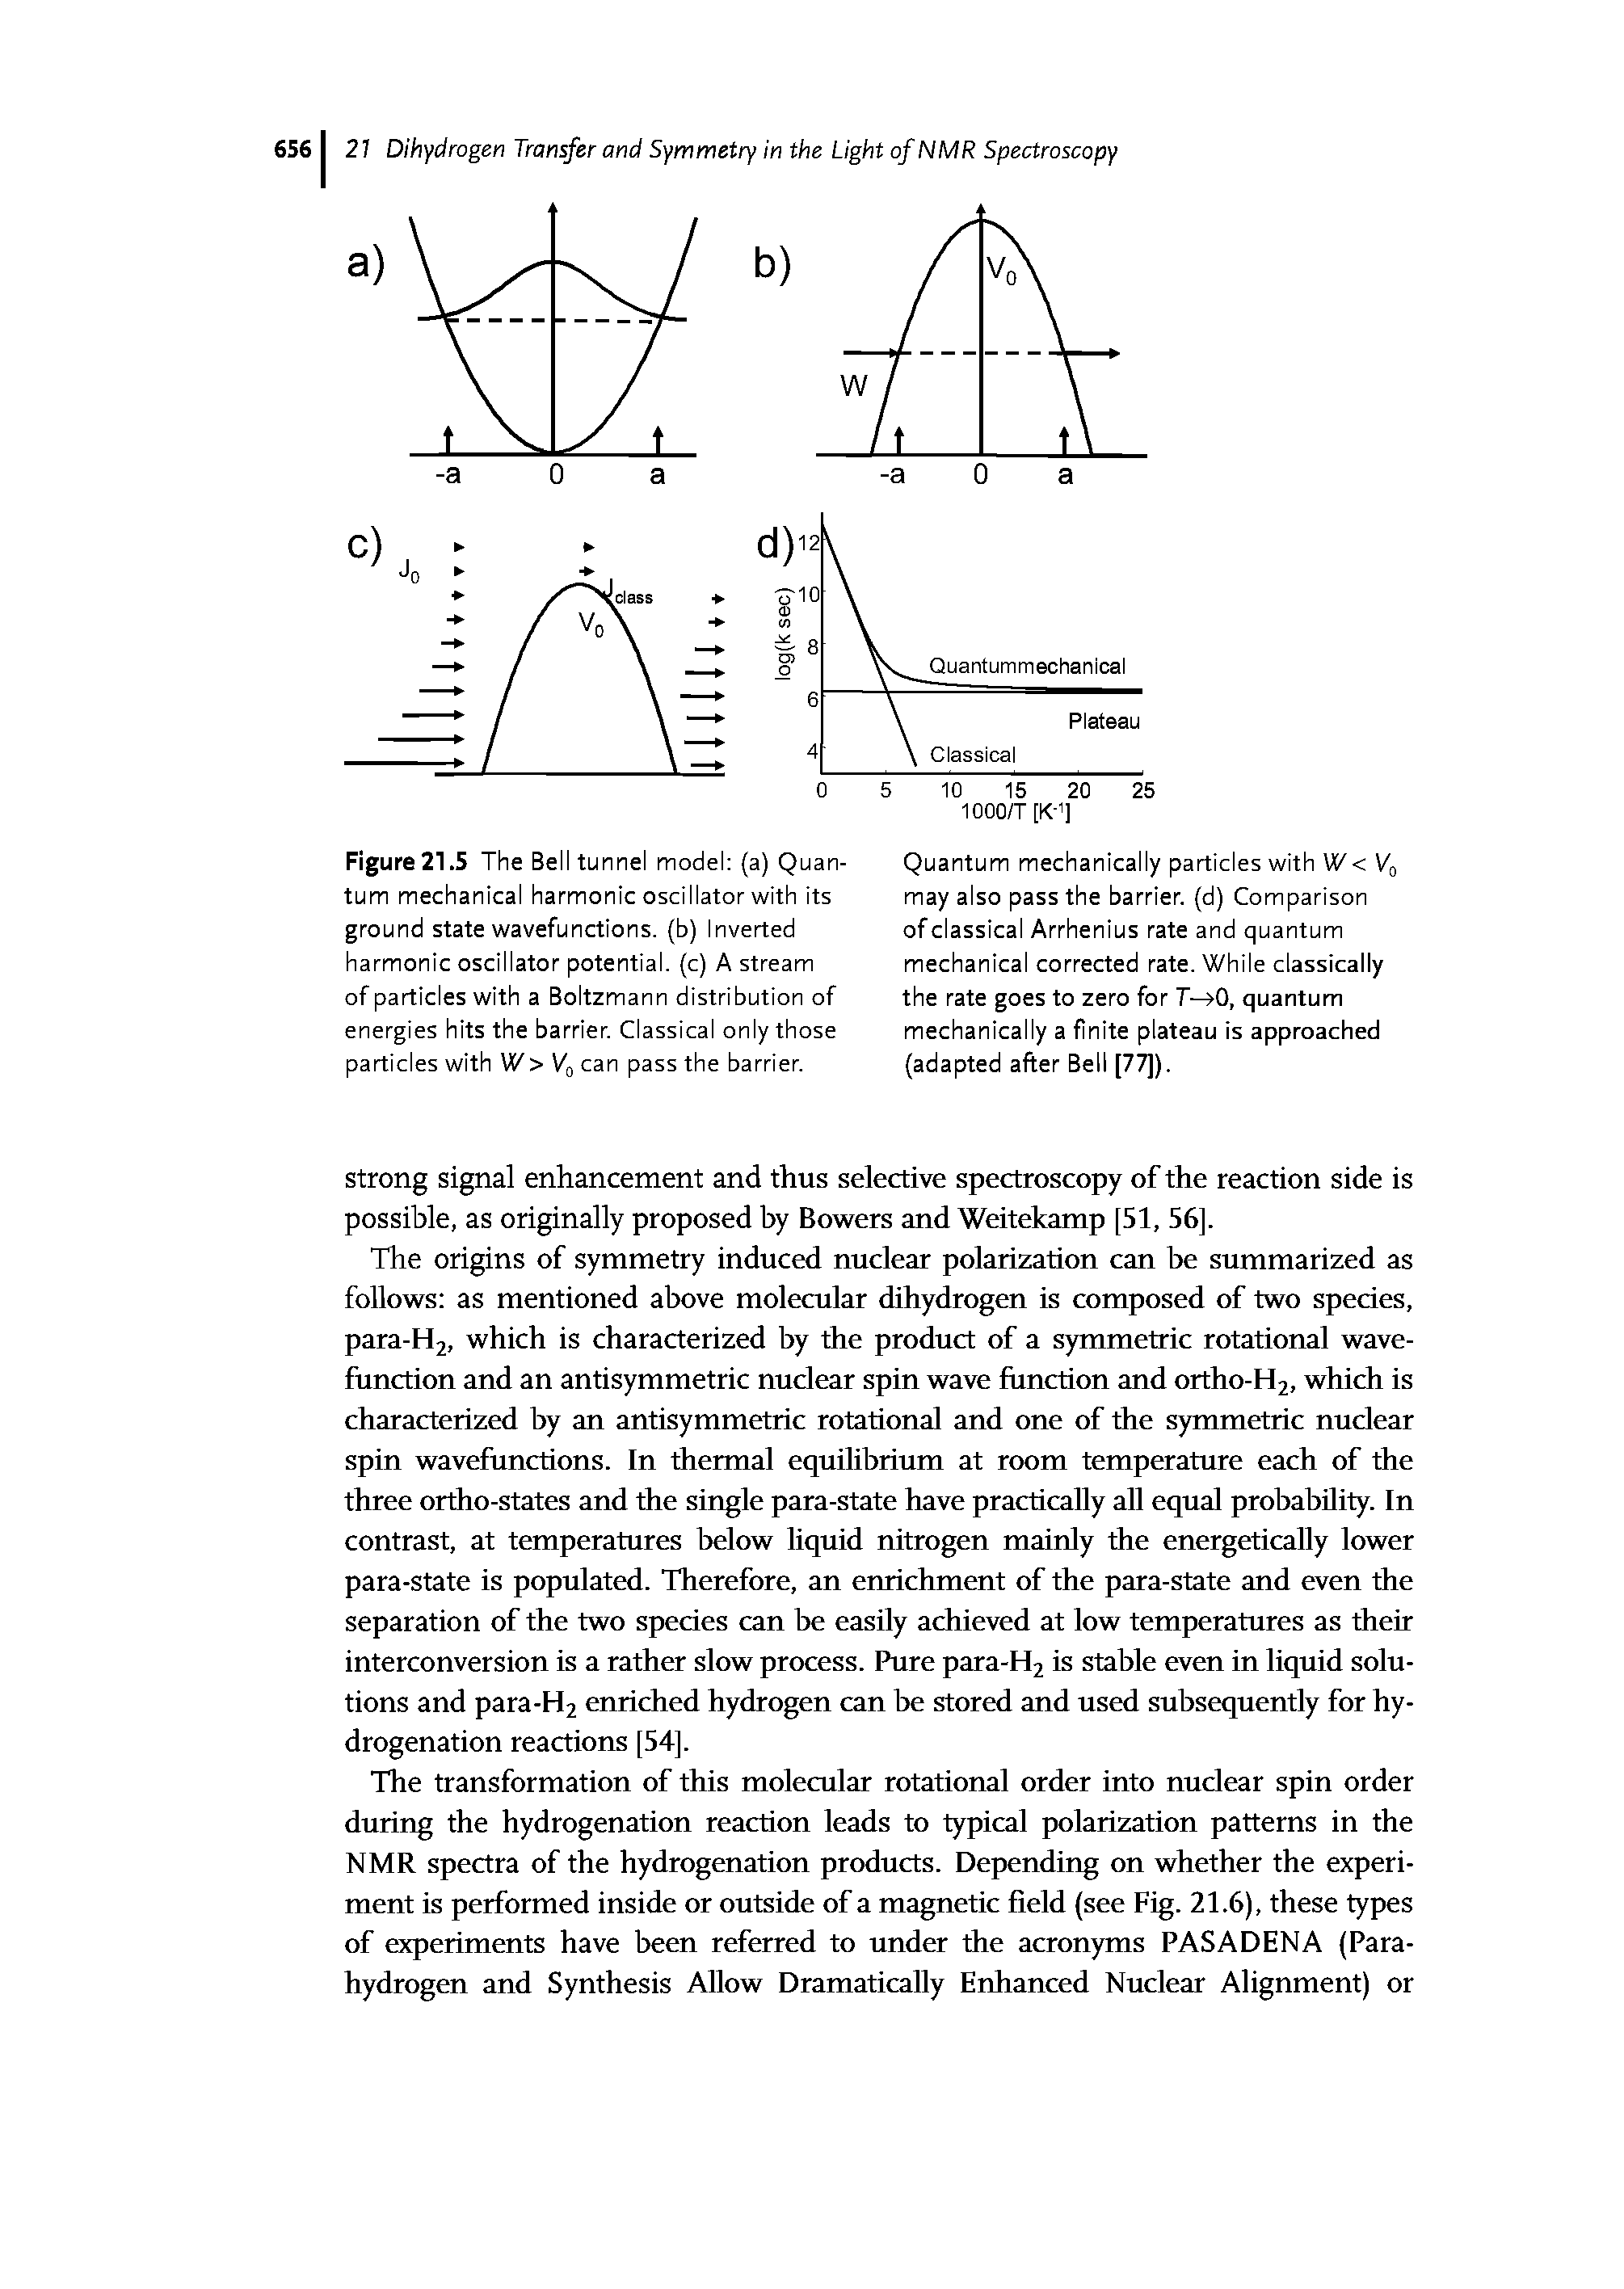 Figure 21.5 The Bell tunnel model (a) Quantum mechanical harmonic oscillator with its ground state wavefunctions. (b) Inverted harmonic oscillator potential, (c) A stream of particles with a Boltzmann distribution of energies hits the barrier. Classical only those particles with W>Vq can pass the barrier.